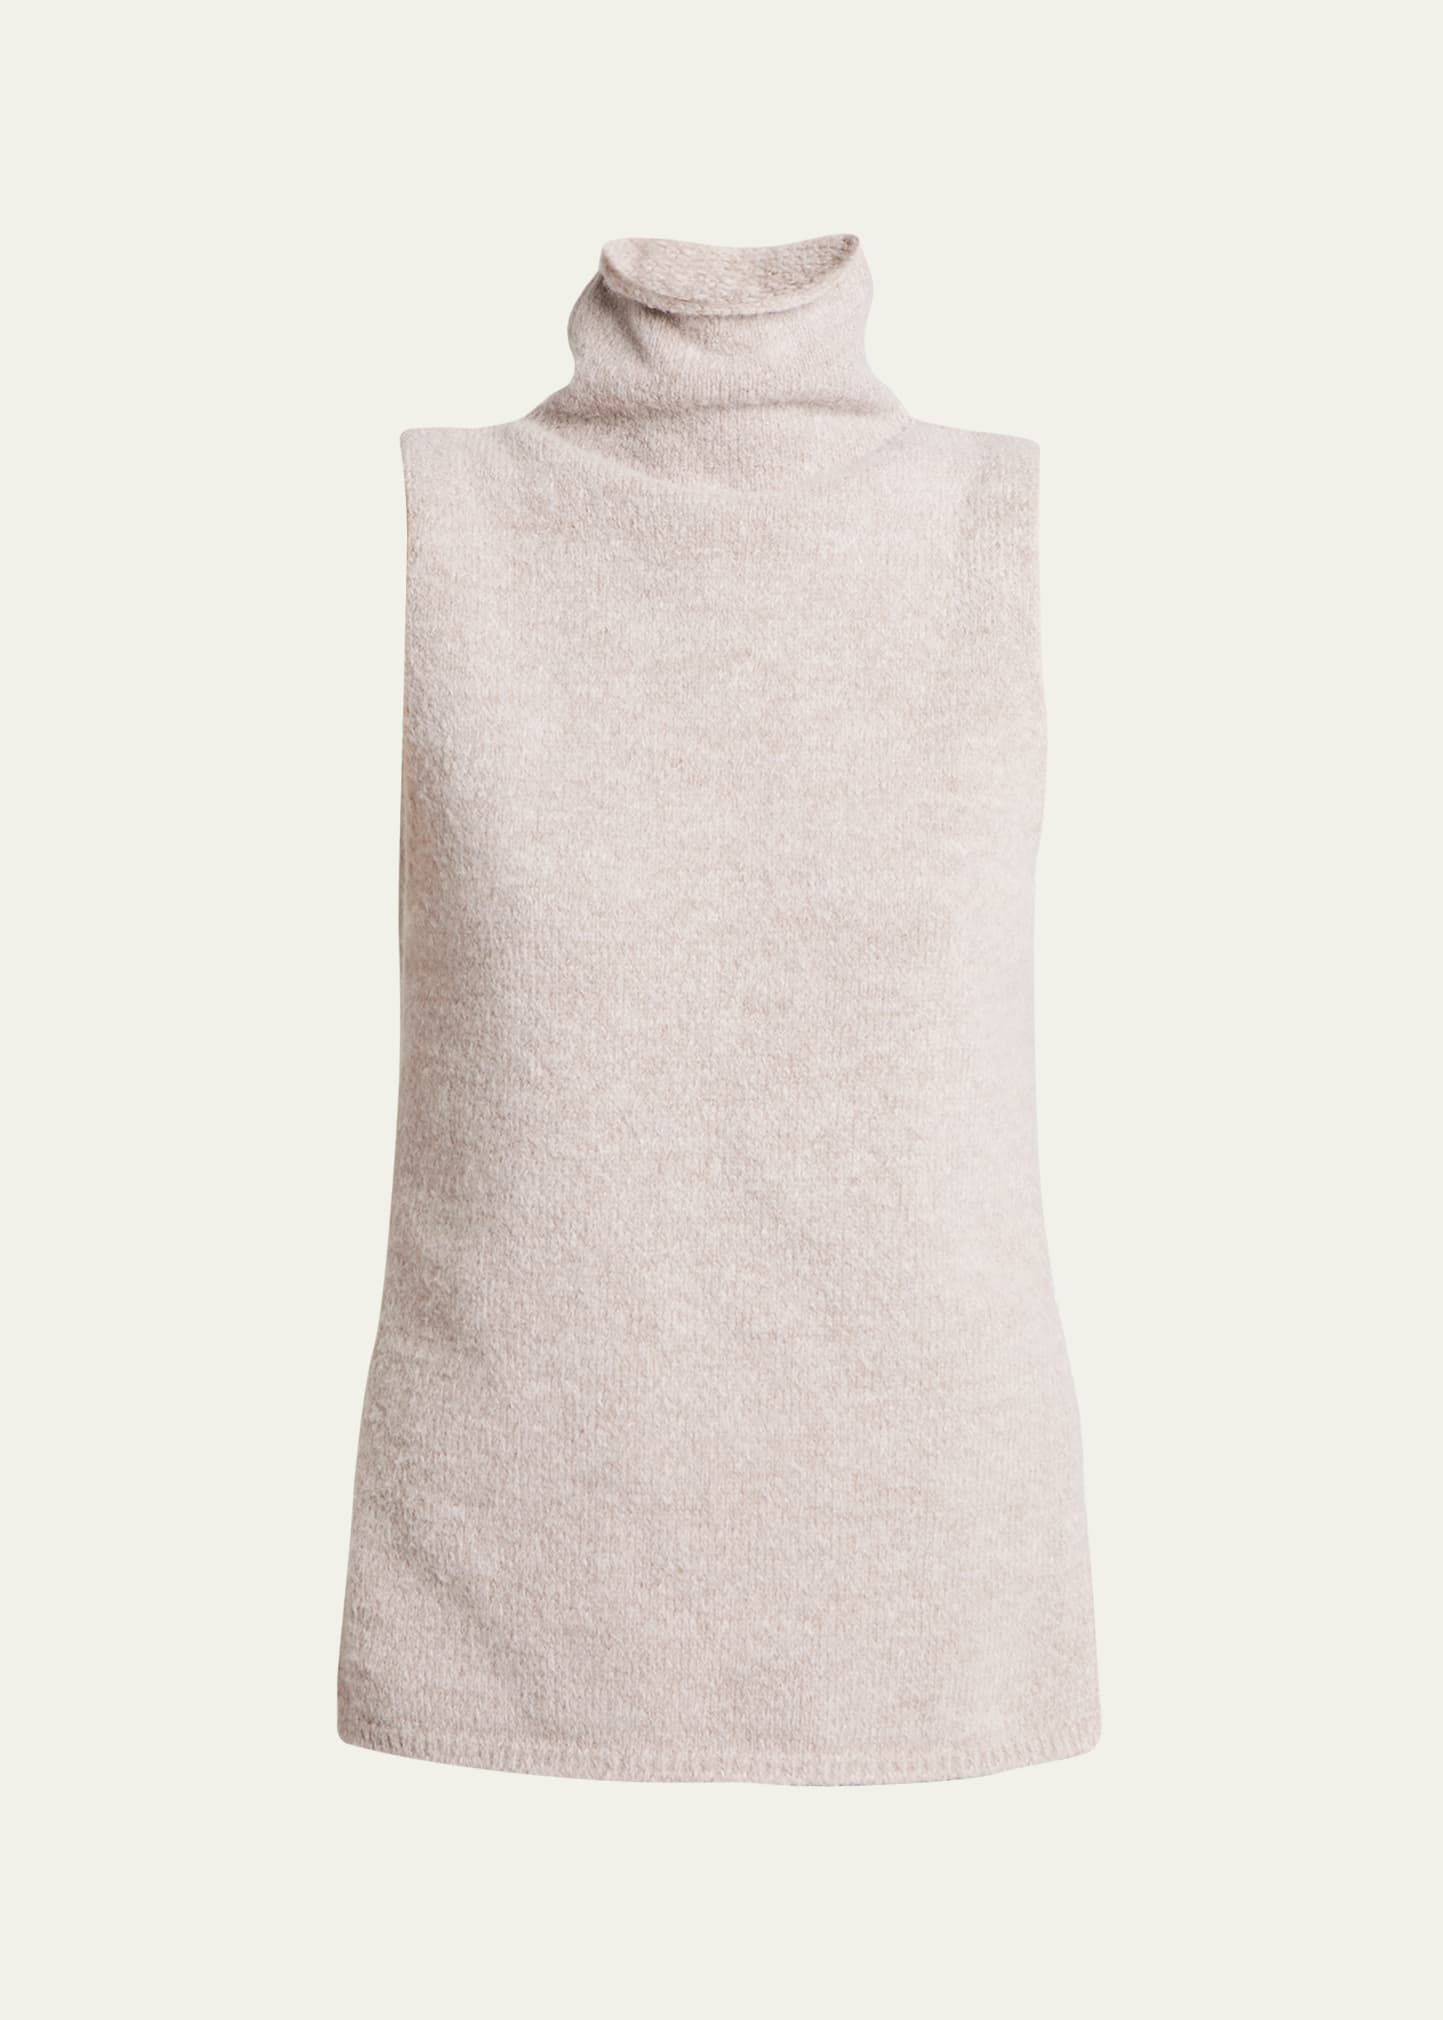 Proenza Schouler White Label Lily Sleeveless Turtleneck Sweater In Fig